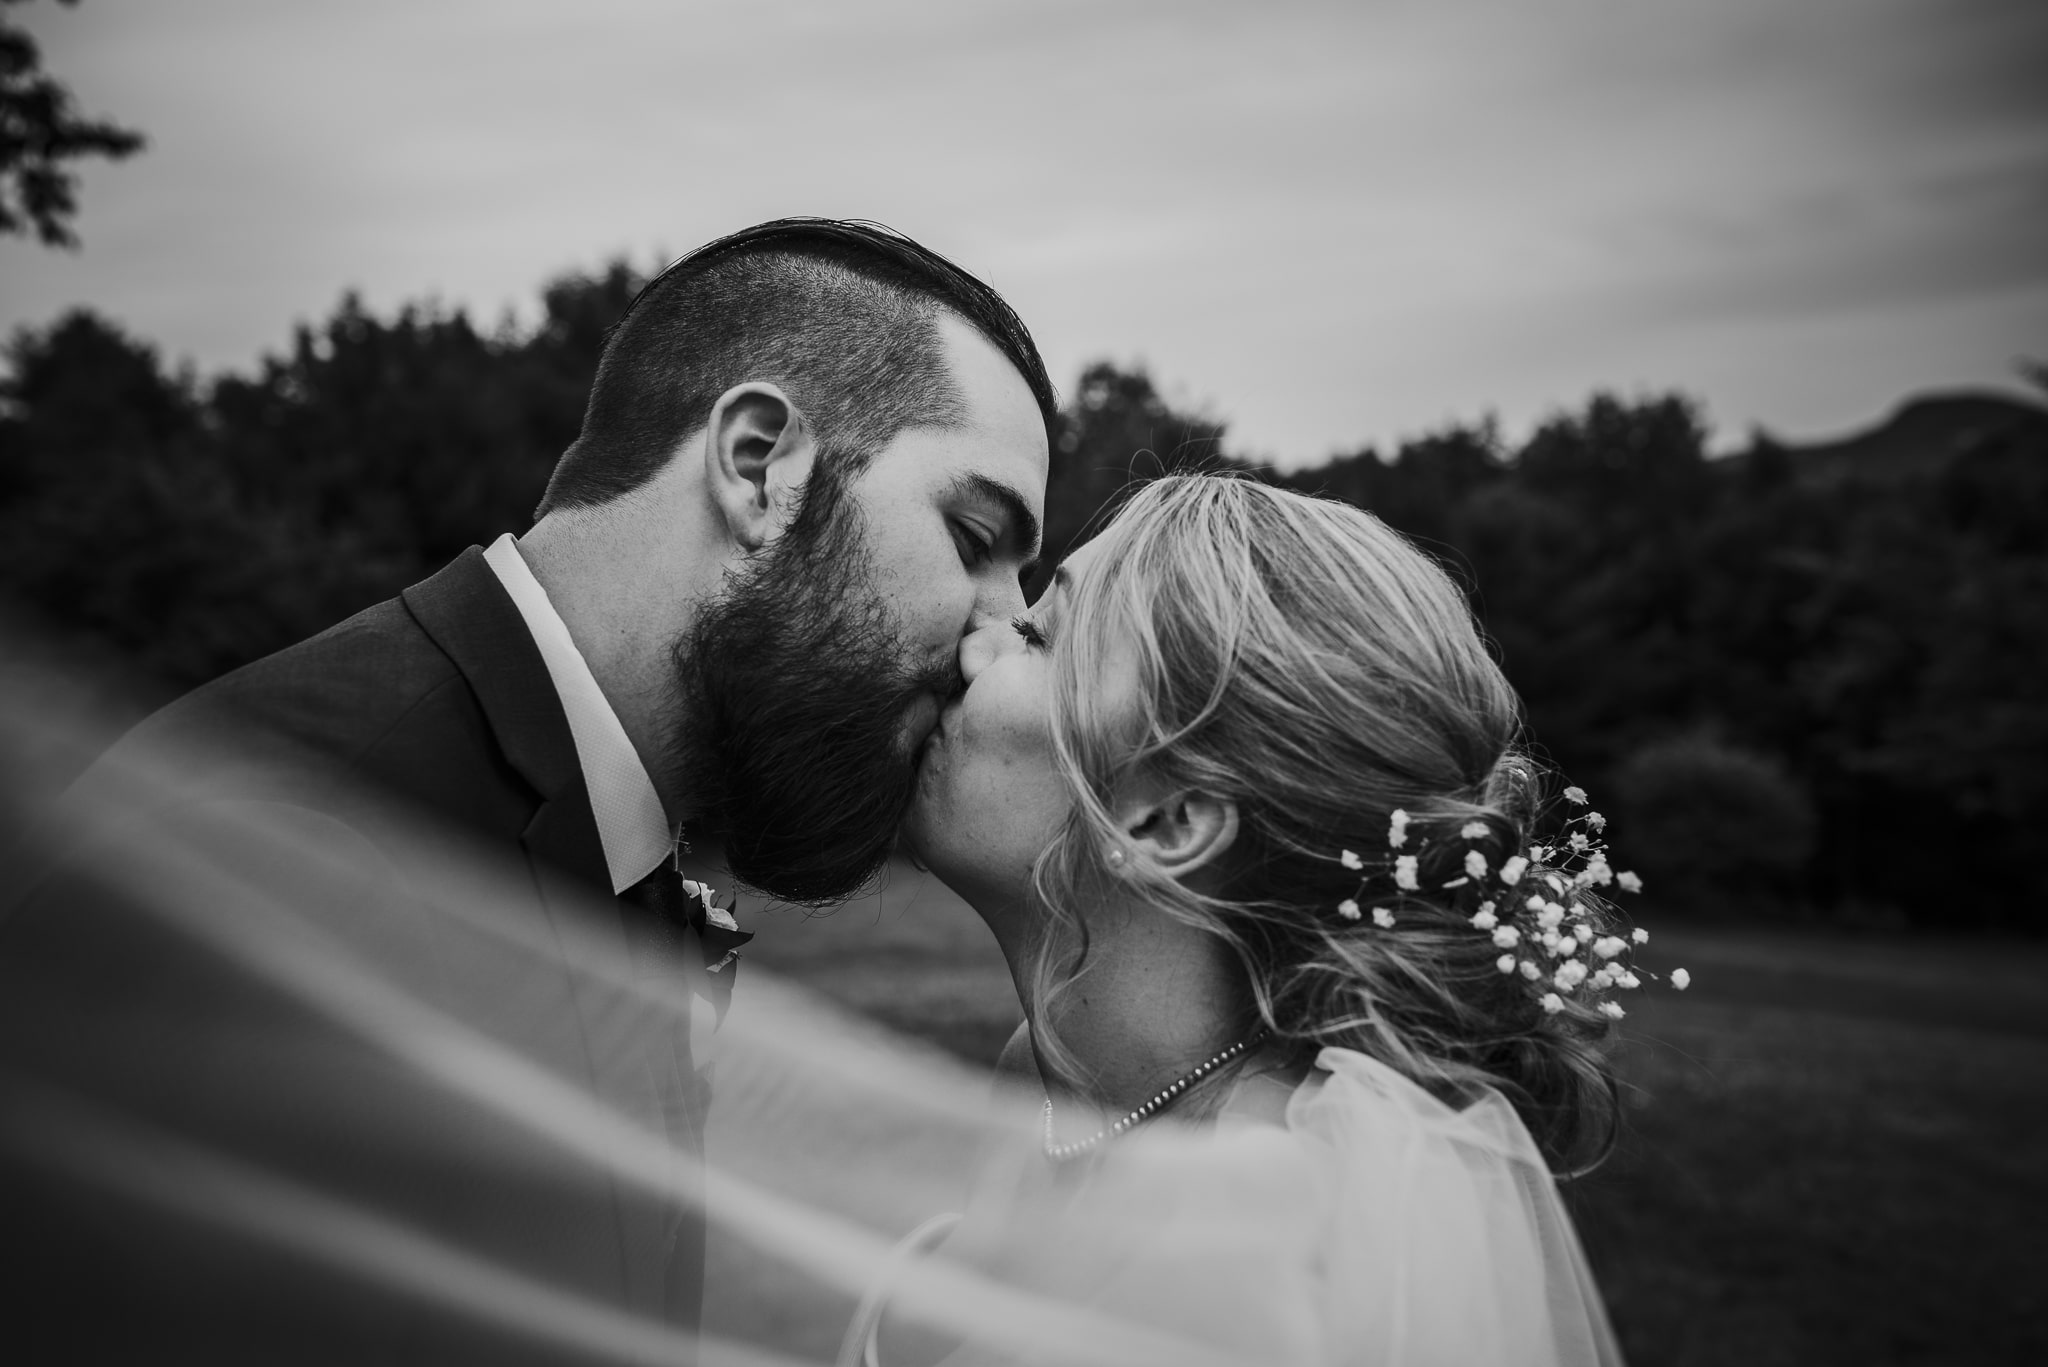 Black and white wedding photography at lucerne inn